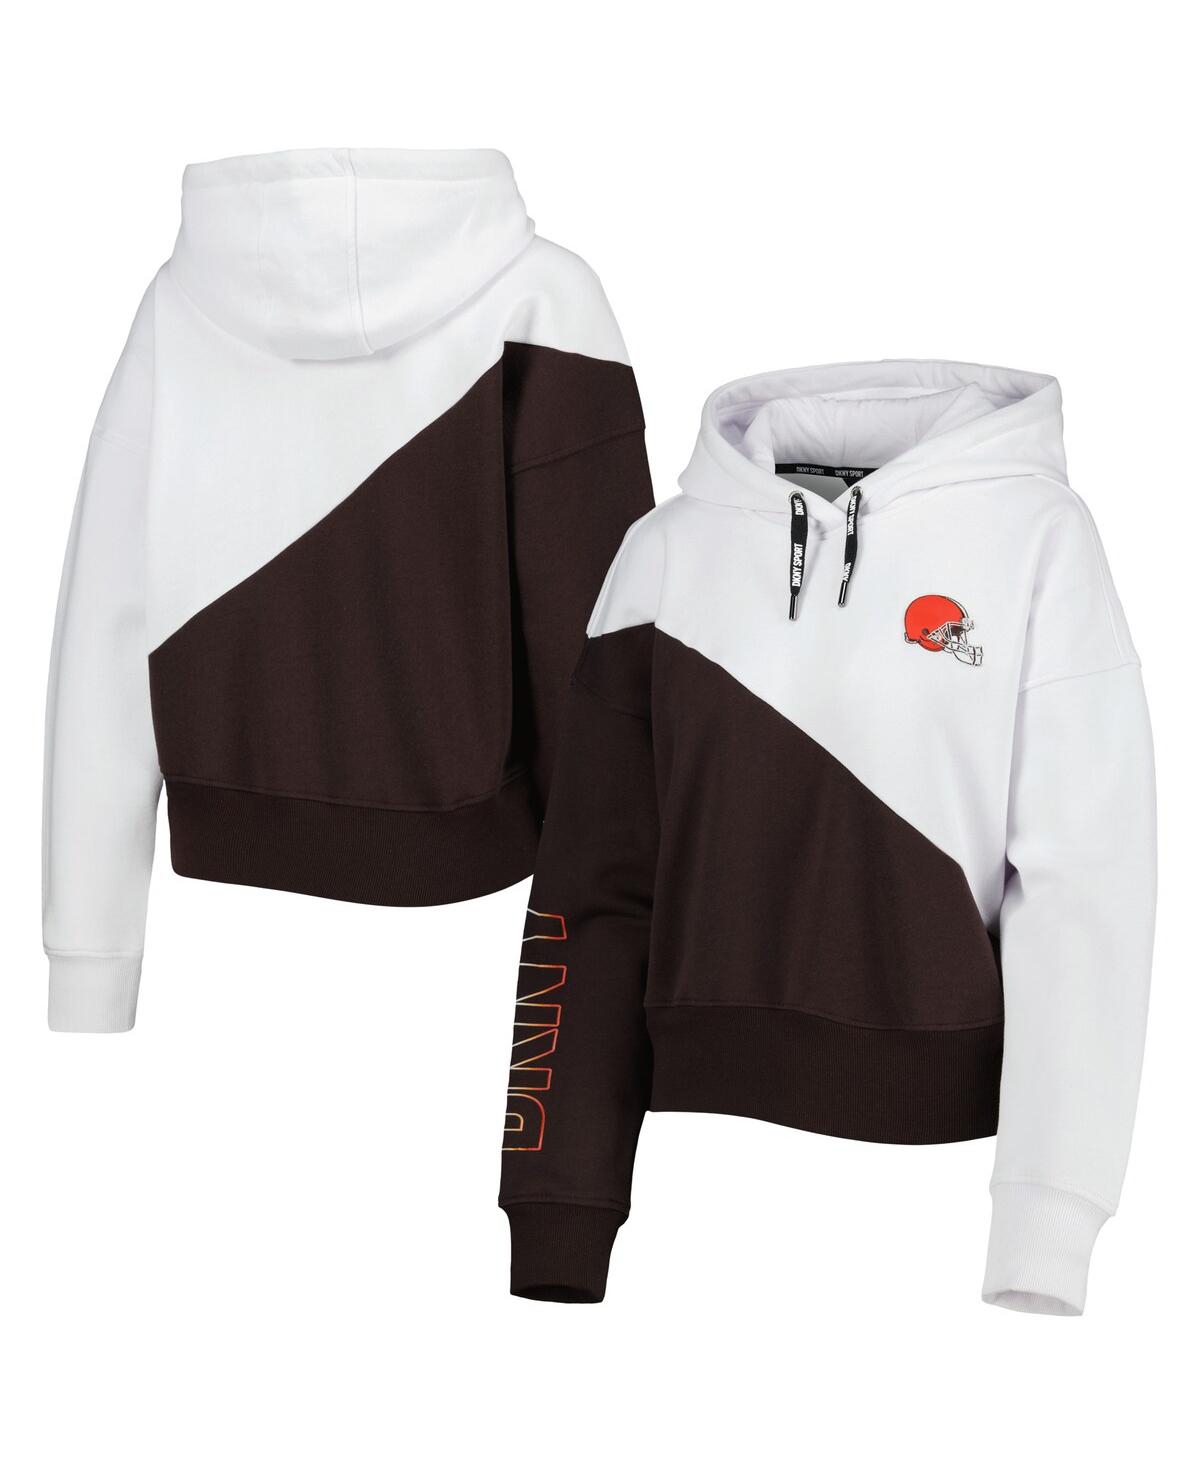 Women's Dkny Sport White, Brown Cleveland Browns Bobbi Color Blocked Pullover Hoodie - White, Brown